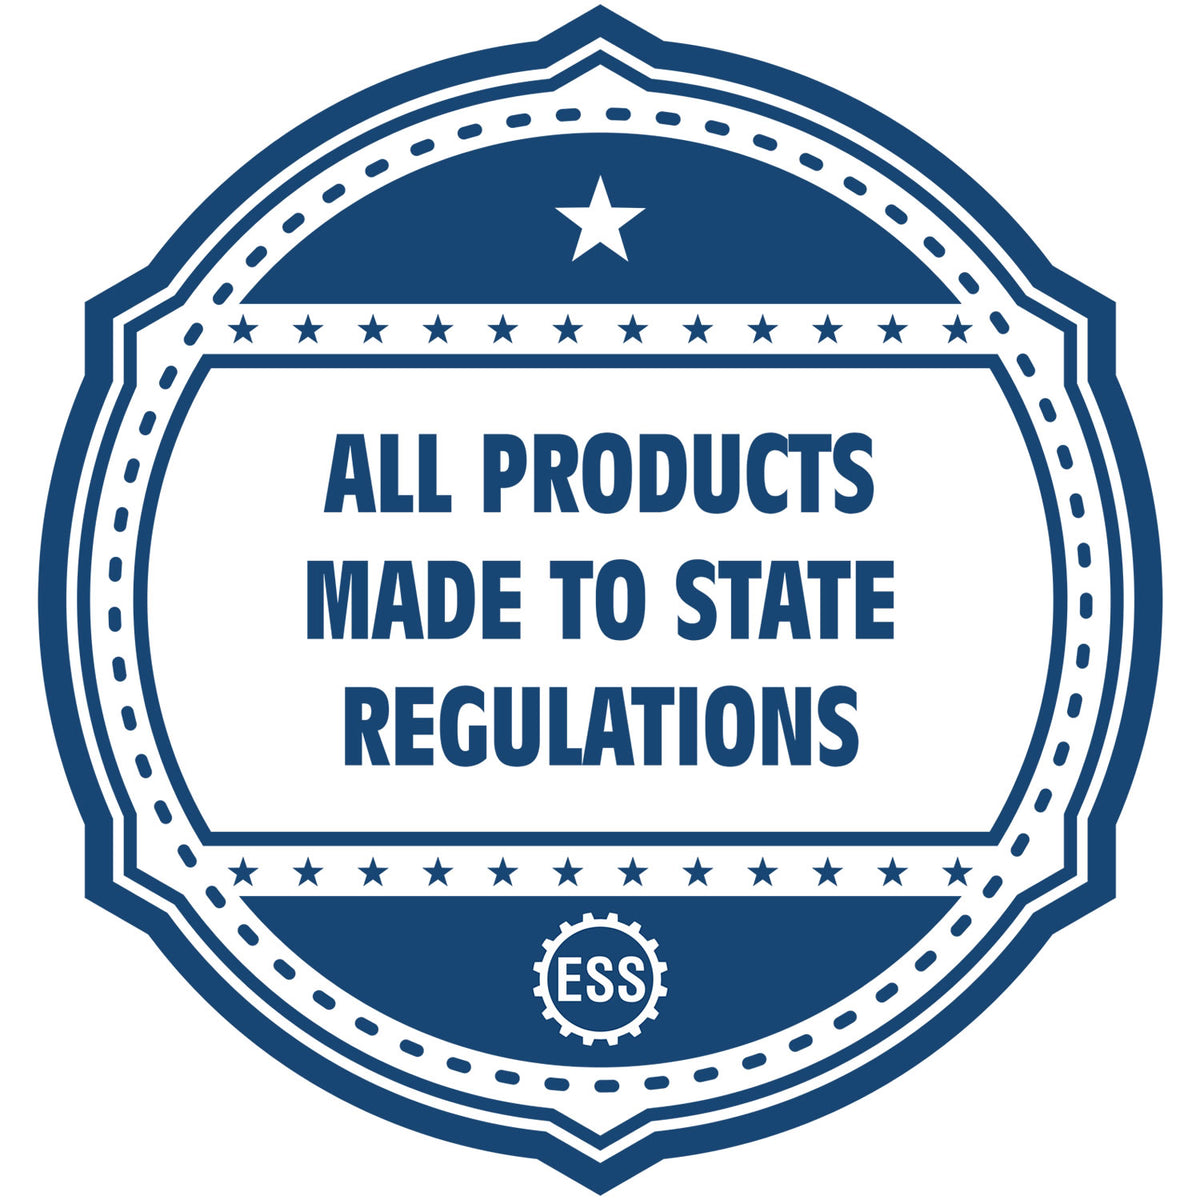 A blue icon or badge for the Heavy Duty Cast Iron Illinois Geologist Seal Embosser showing that this product is made in compliance with state regulations.